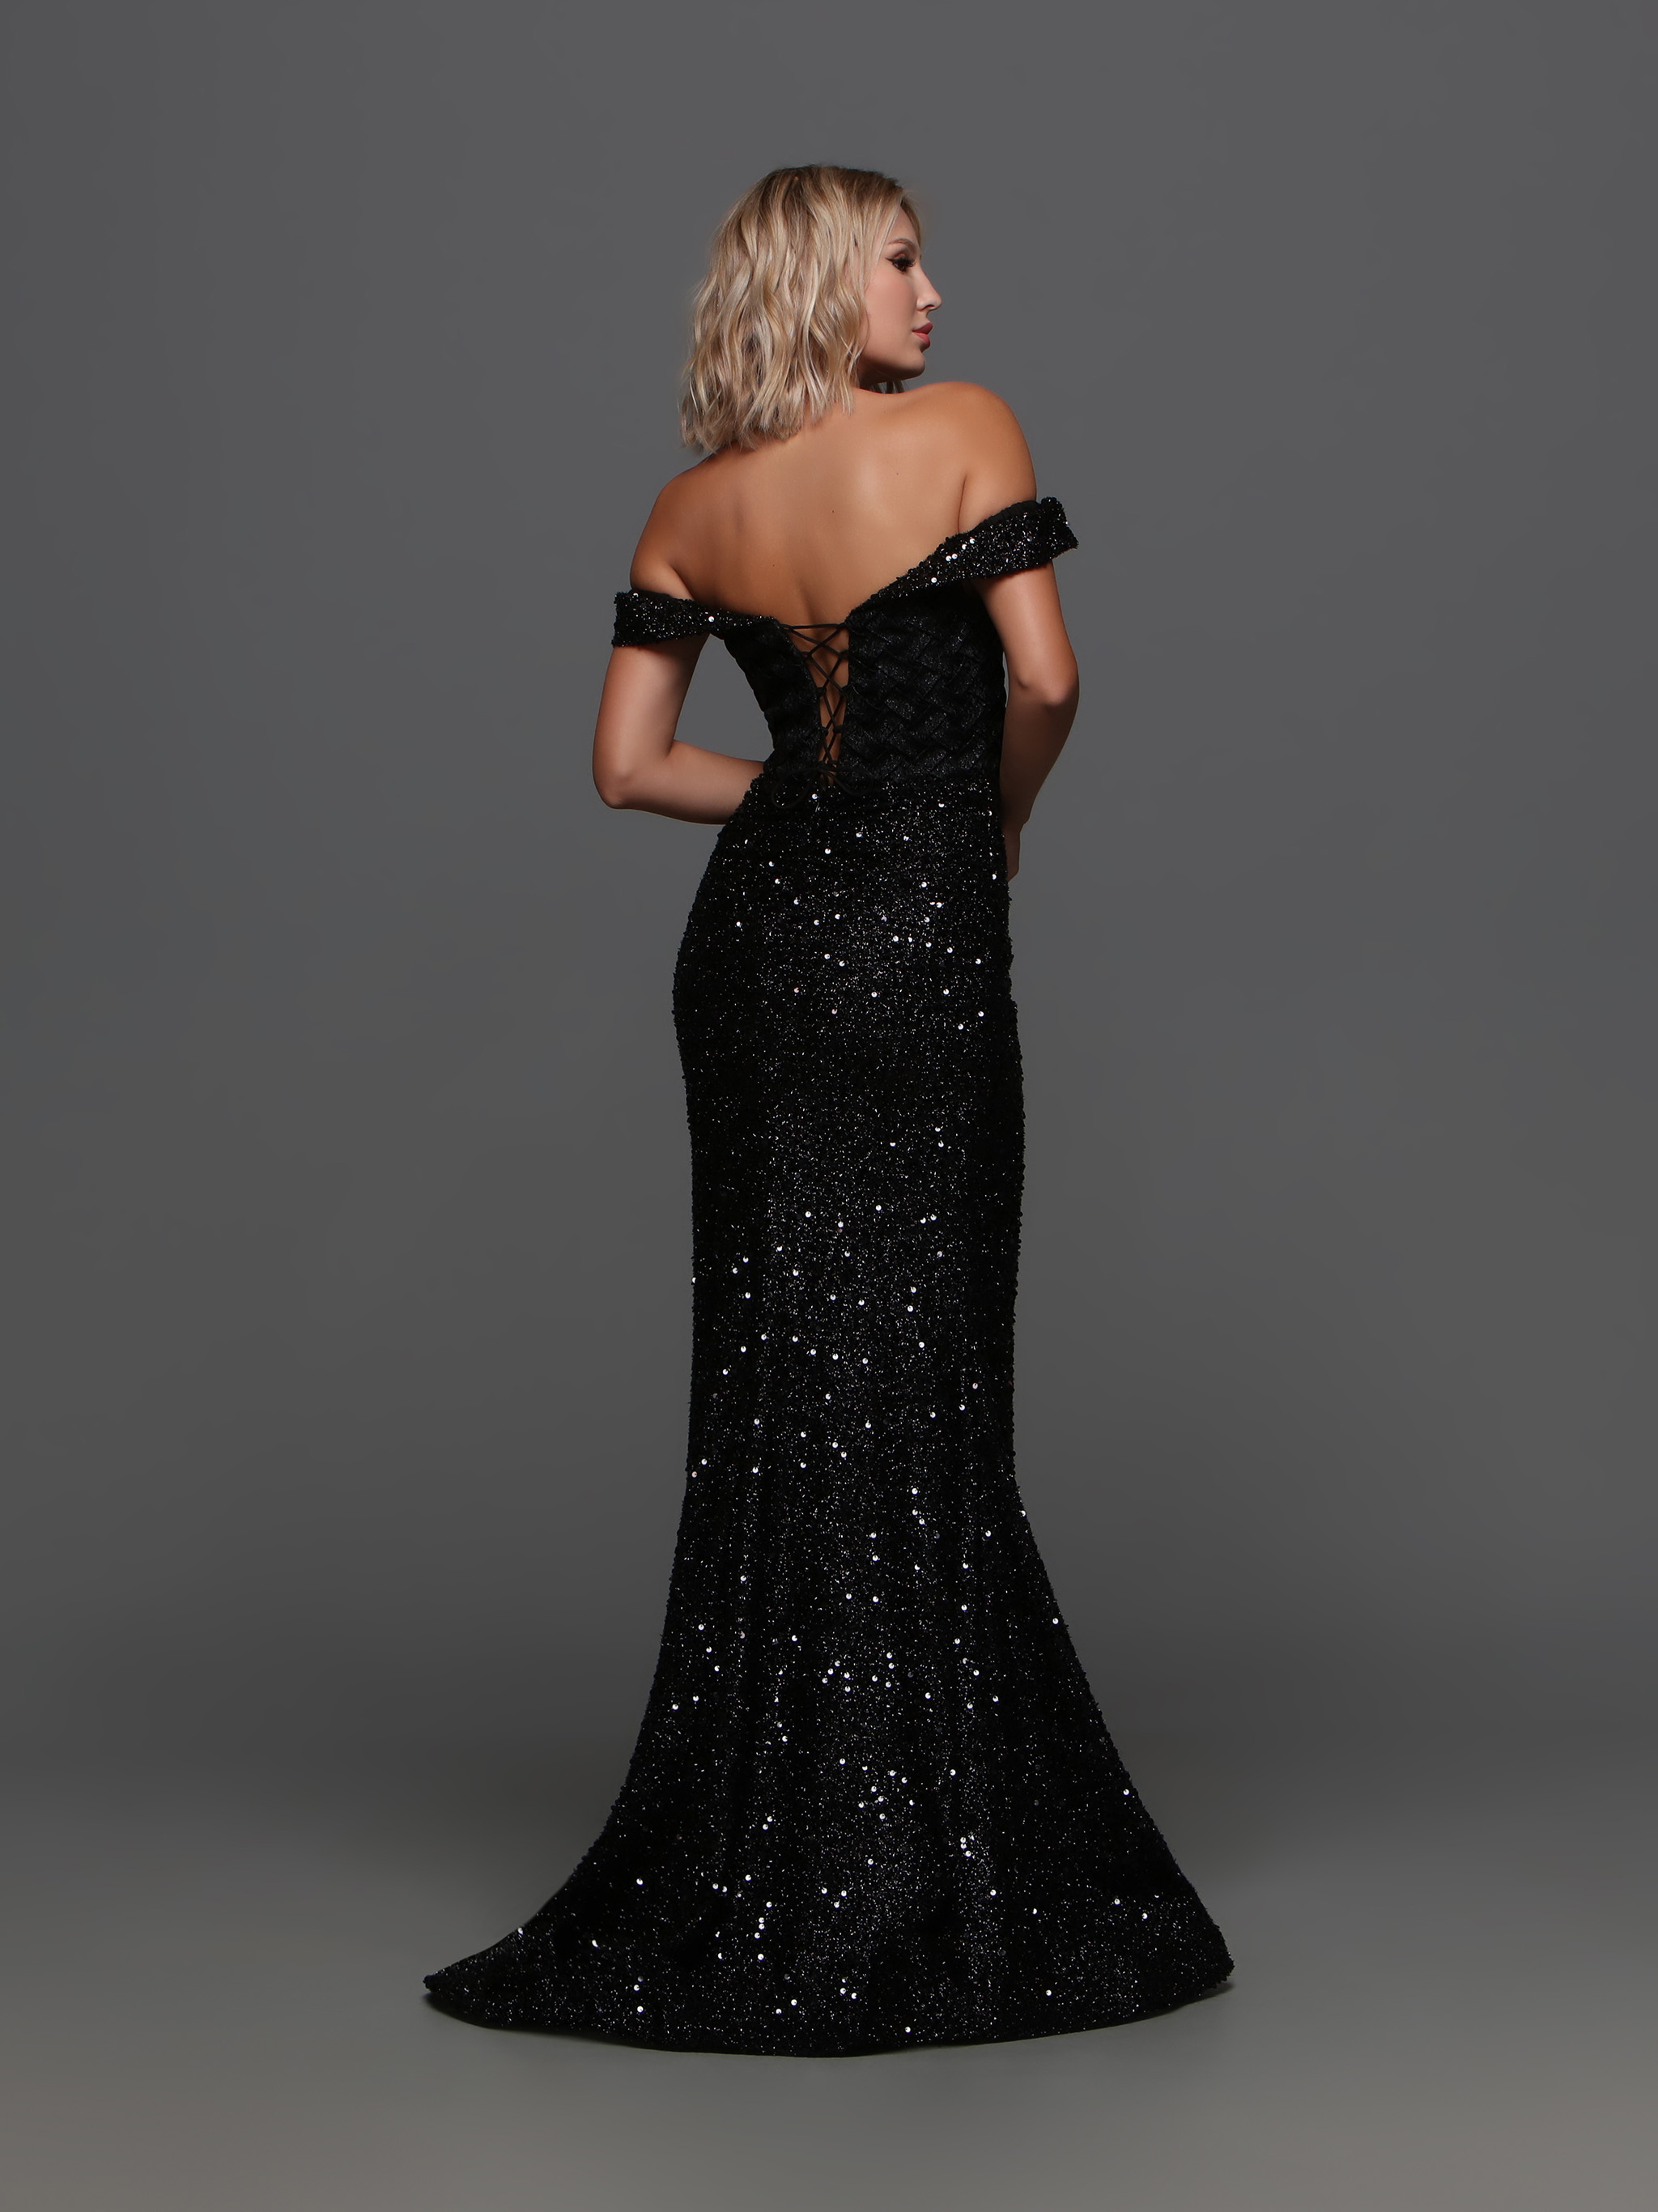 Image showing back view of style #72307